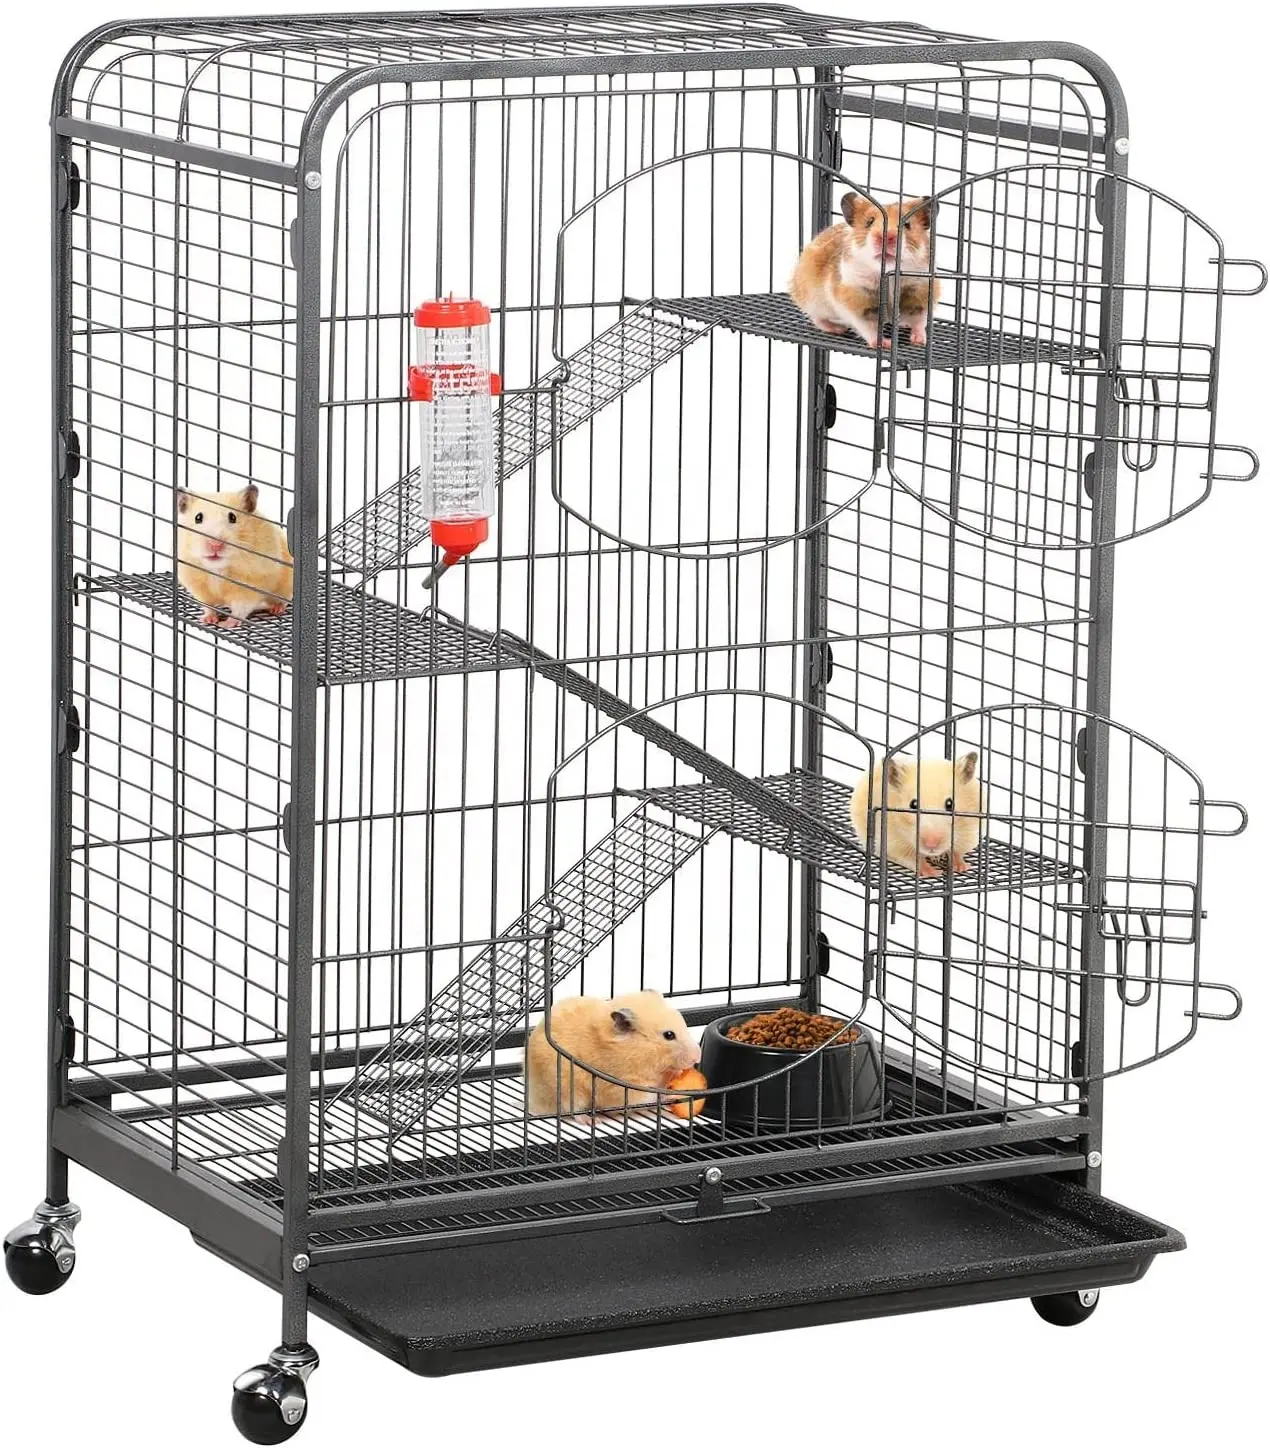 37-inch Metal Ferret Chinchilla Cage Indoor Outdoor Small Animals Hutch for Squirrel w/ 2 Front Doors/Feeder/Wheels Ramp Tray